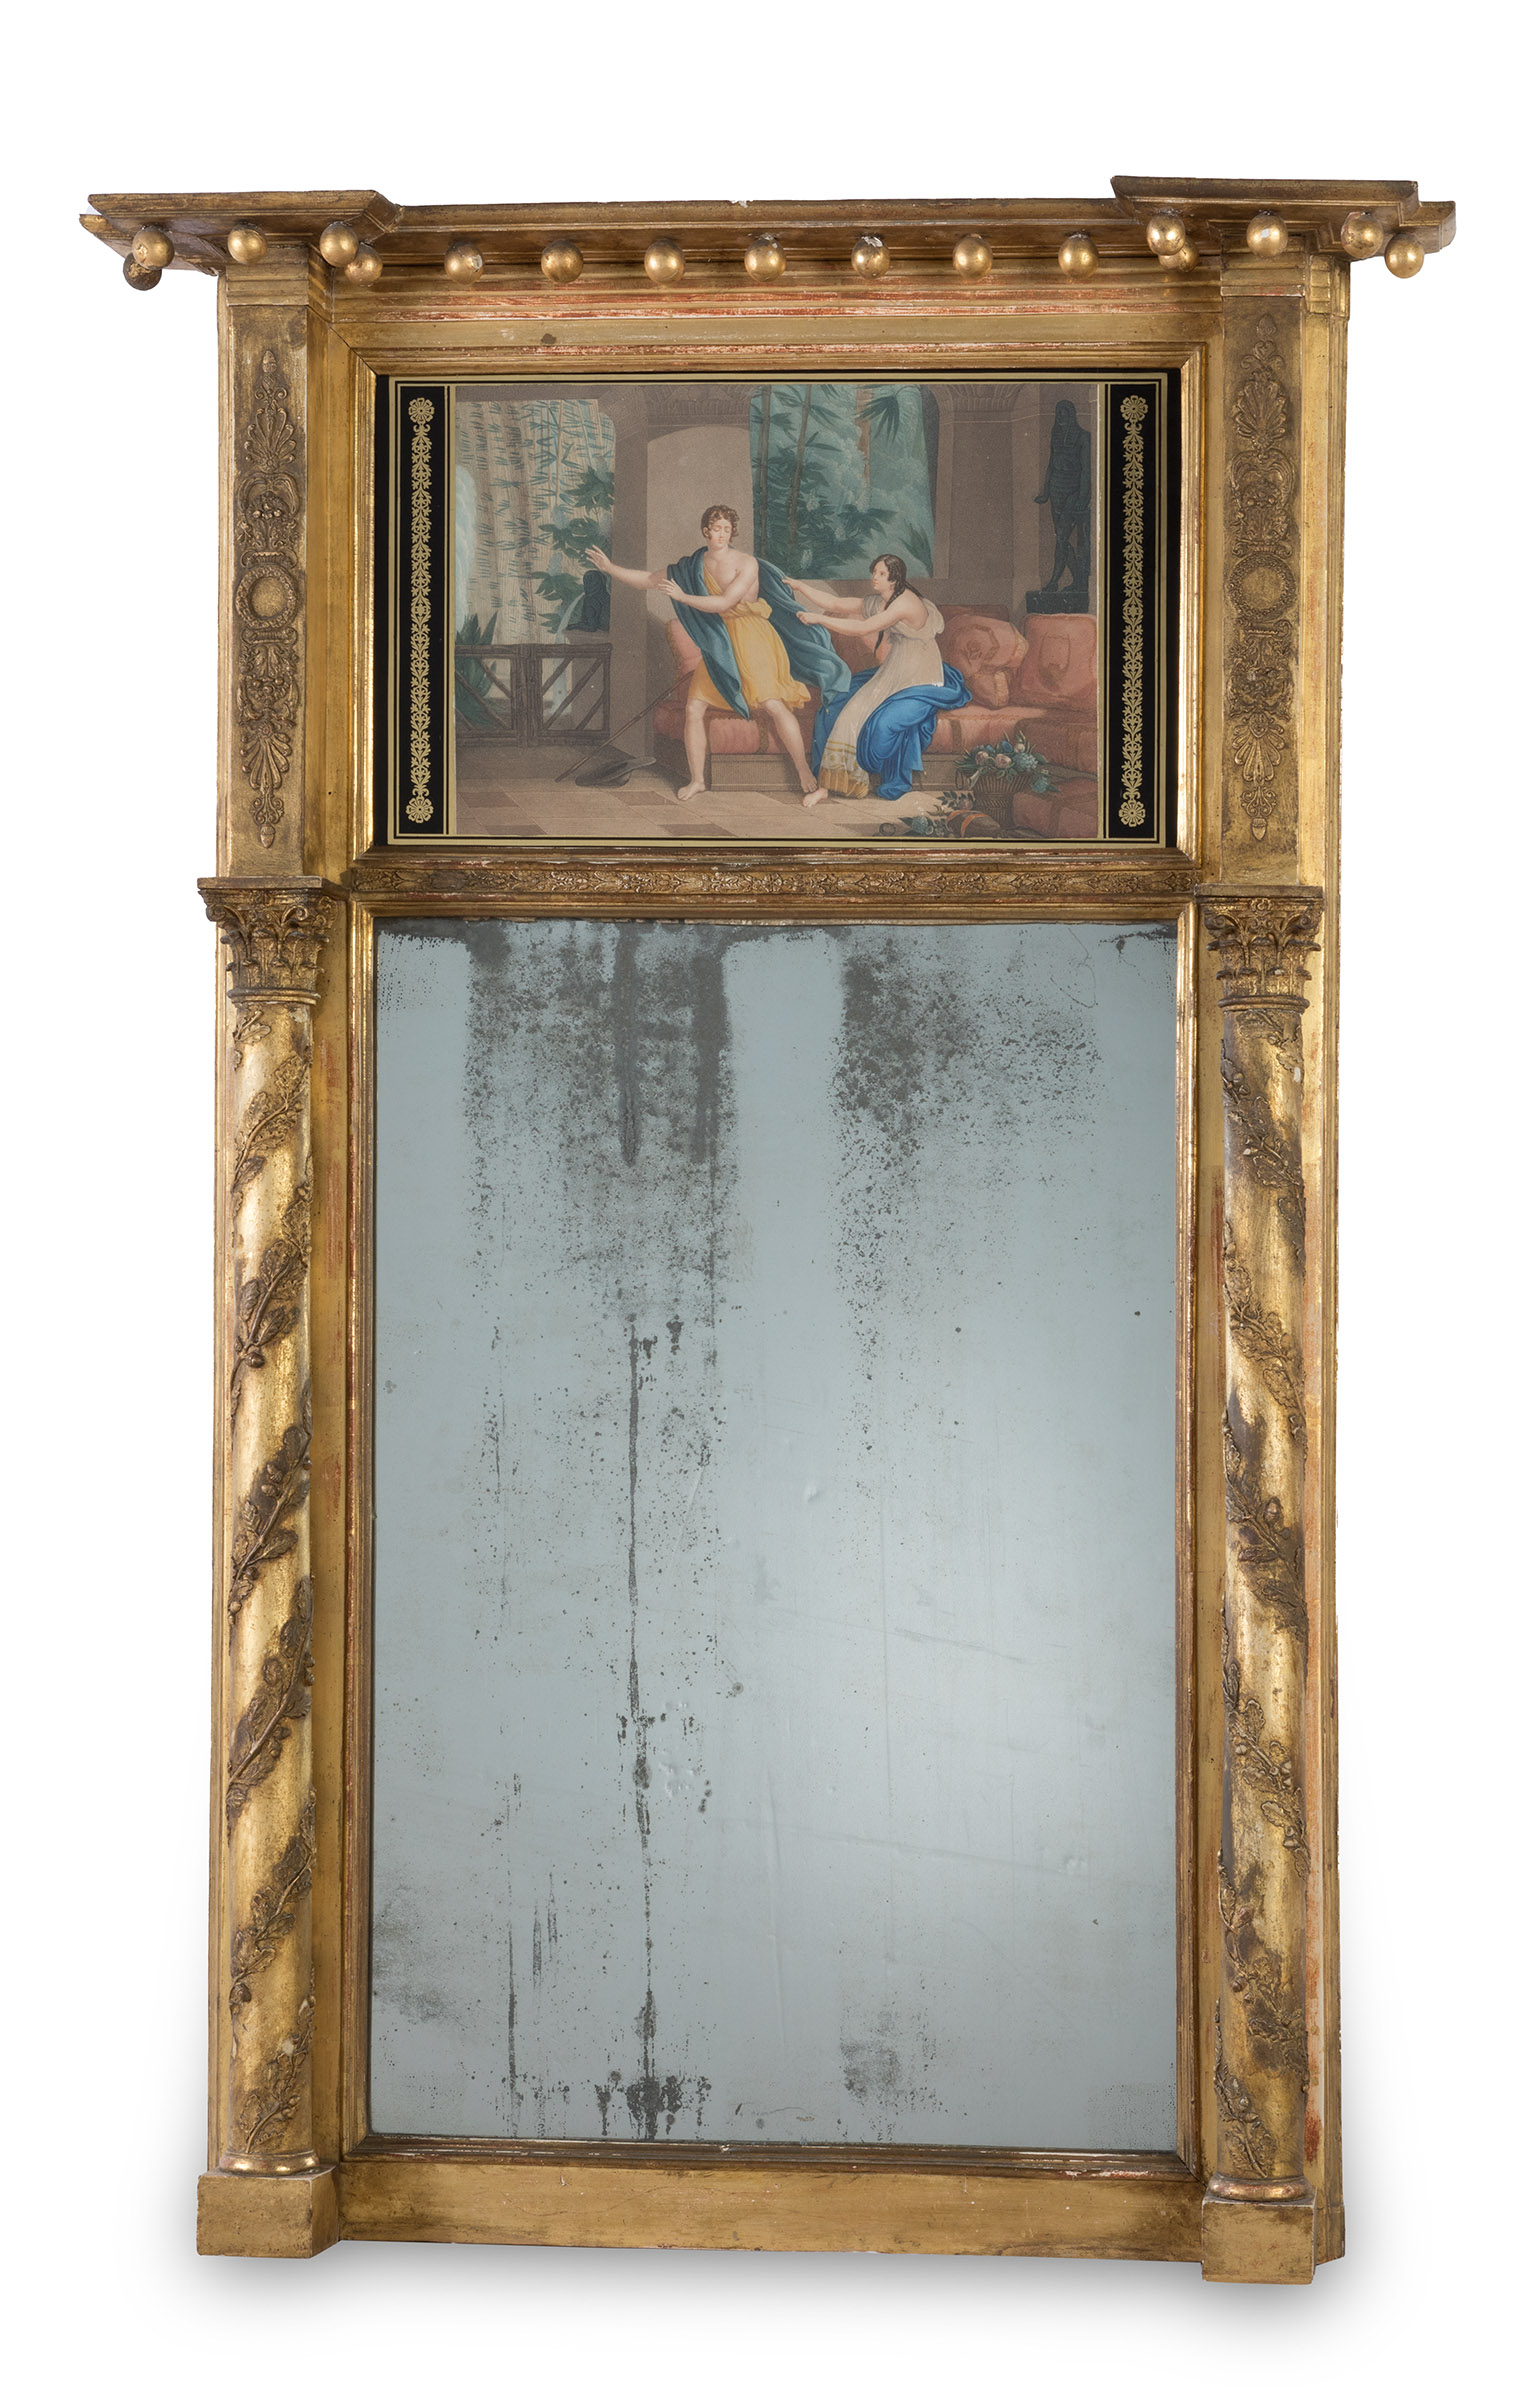 Trumeau mirror. France, 18th century.Carved and gilded wood.With period engraving on the top.